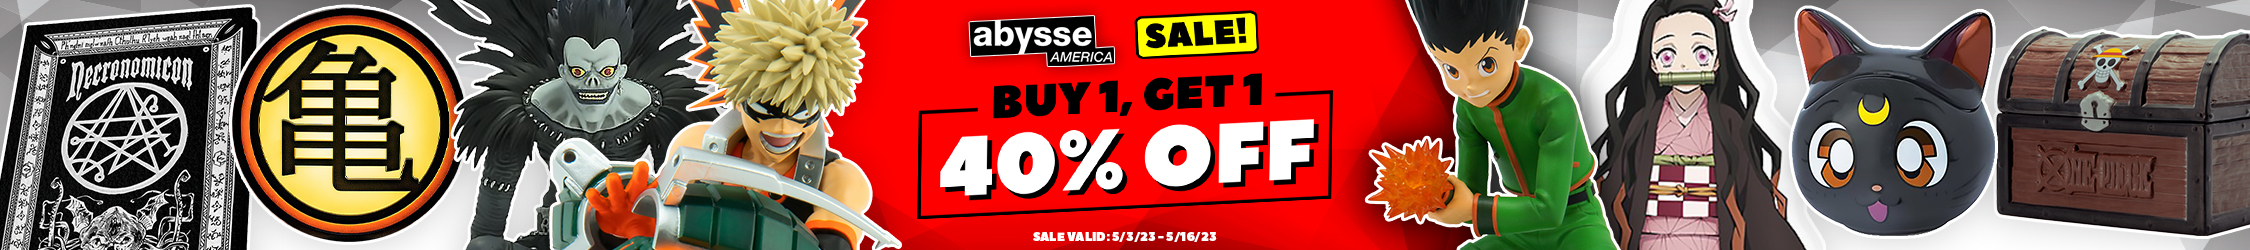 Buy One, Get One 40% off on Abysse America